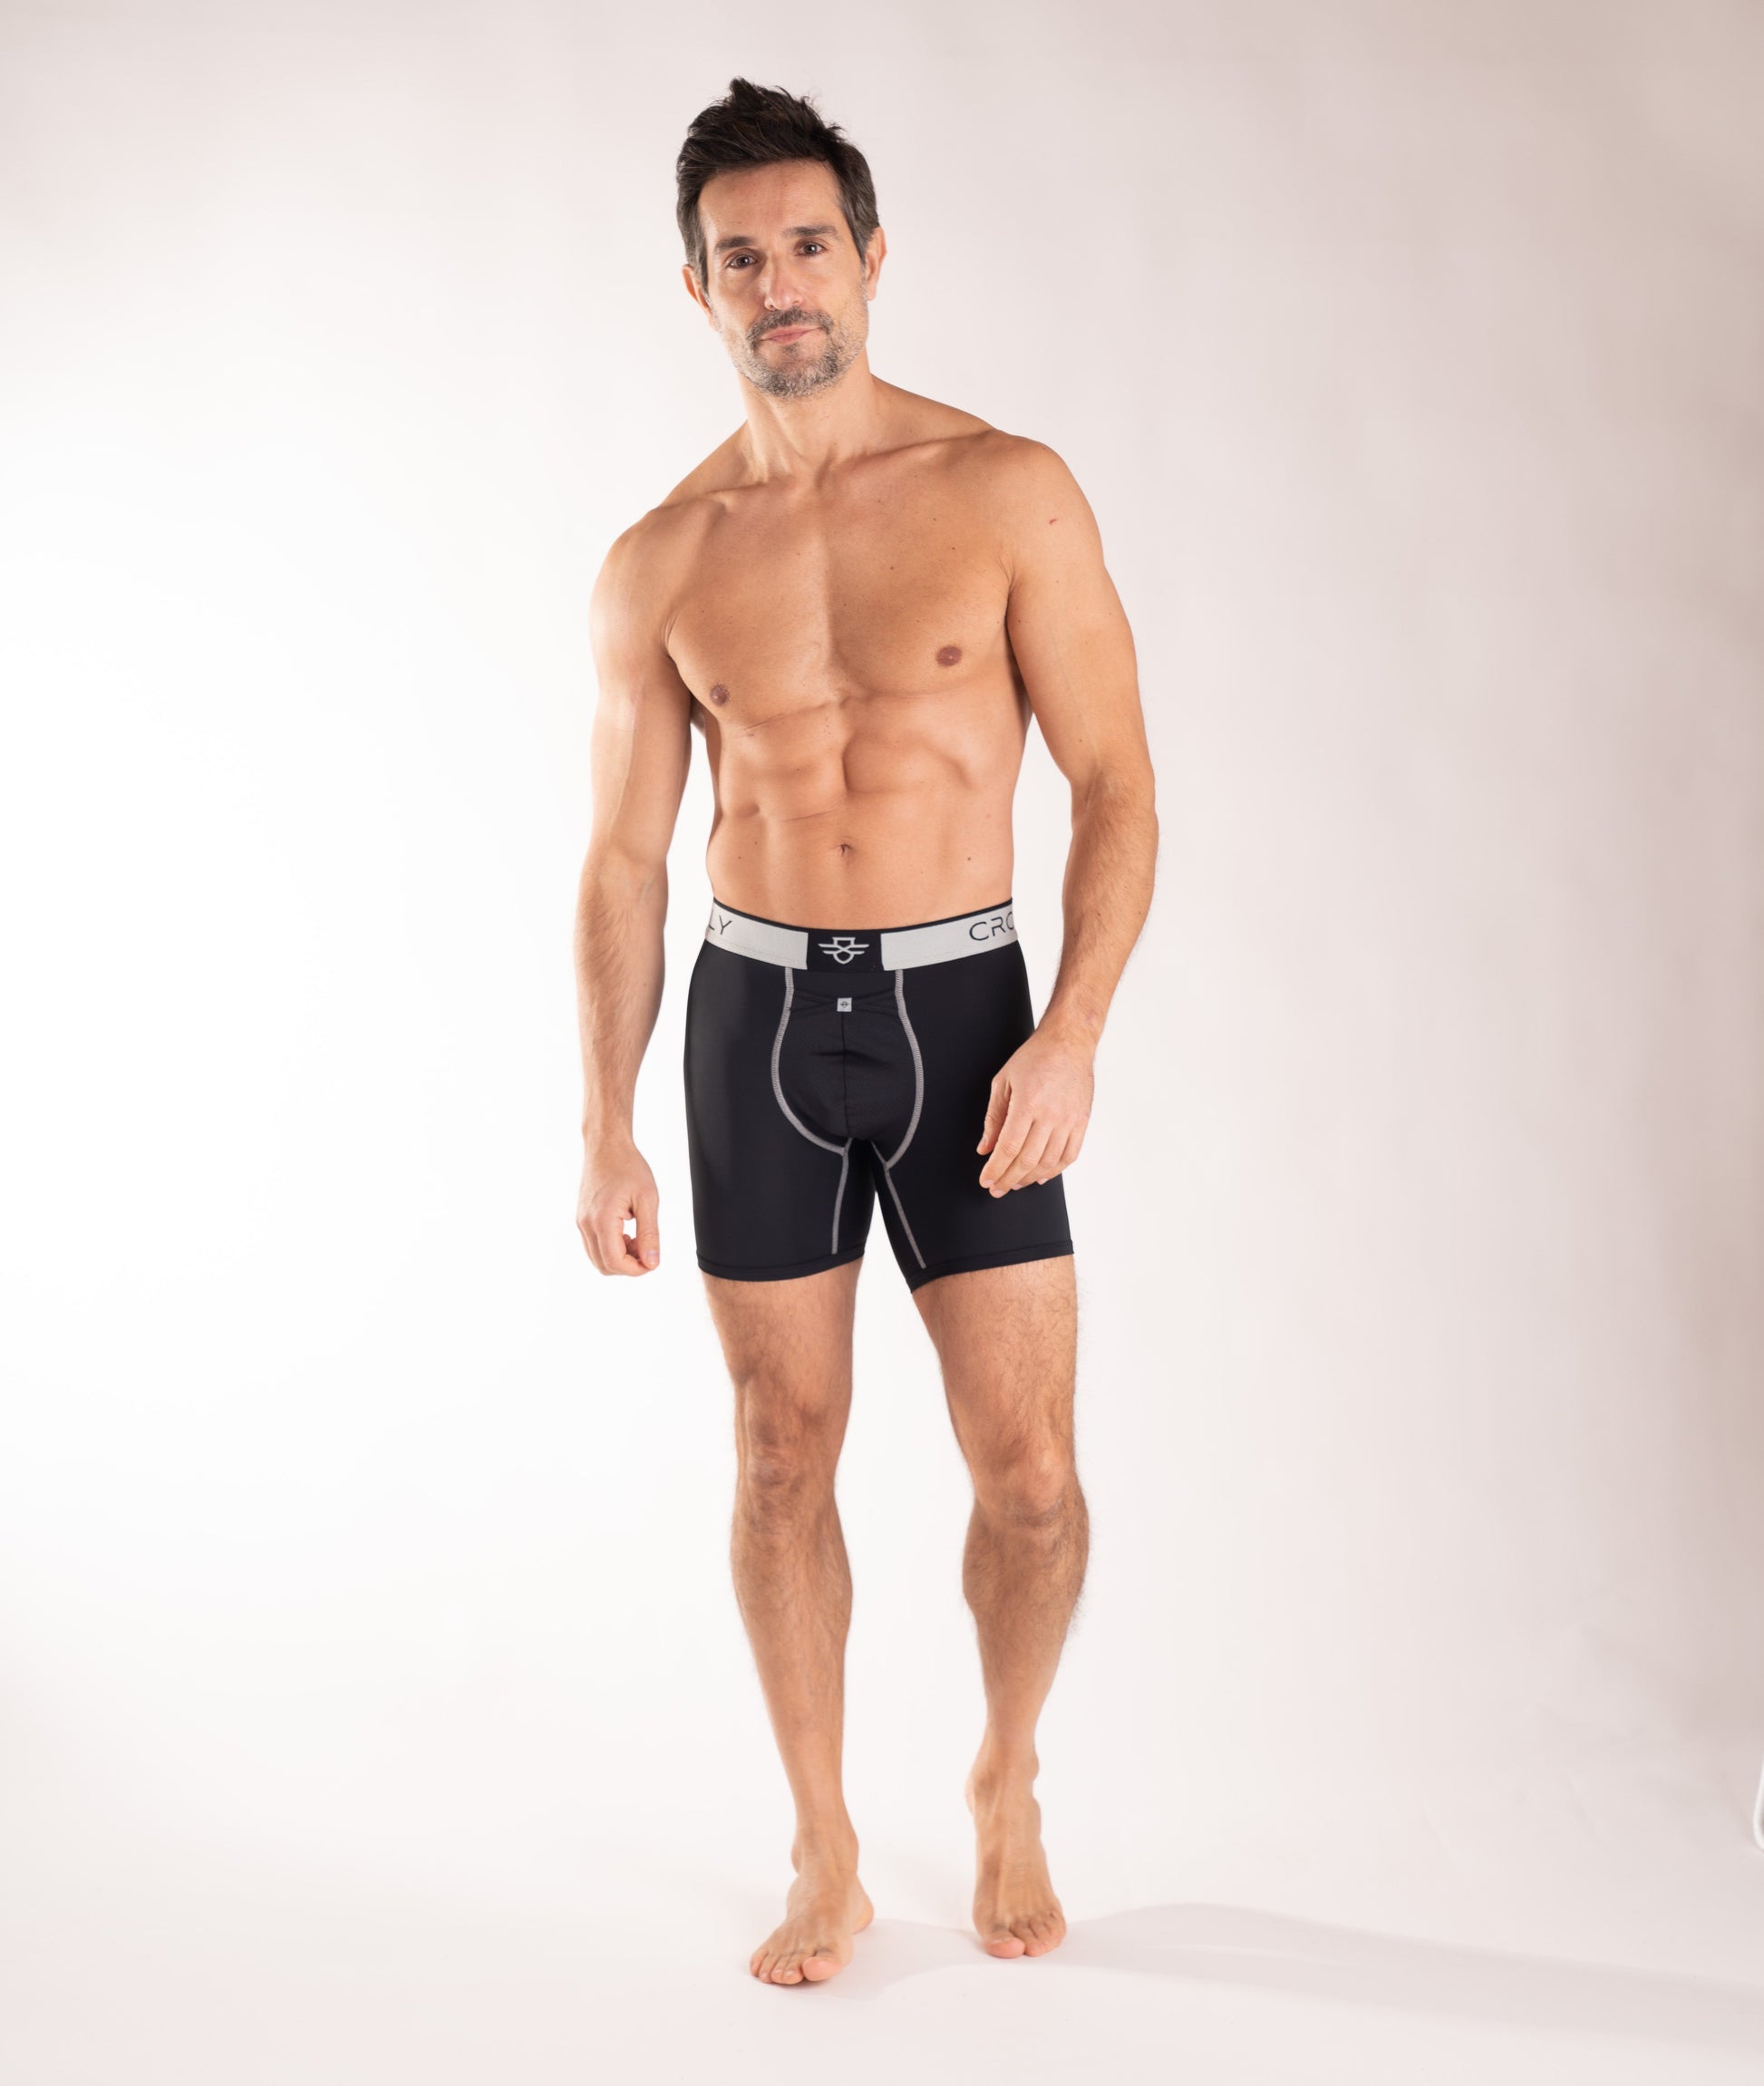 Crossfly men's Pro 7" black / silver boxers from the Performance series, featuring X-Fly and Coccoon internal pocket support.